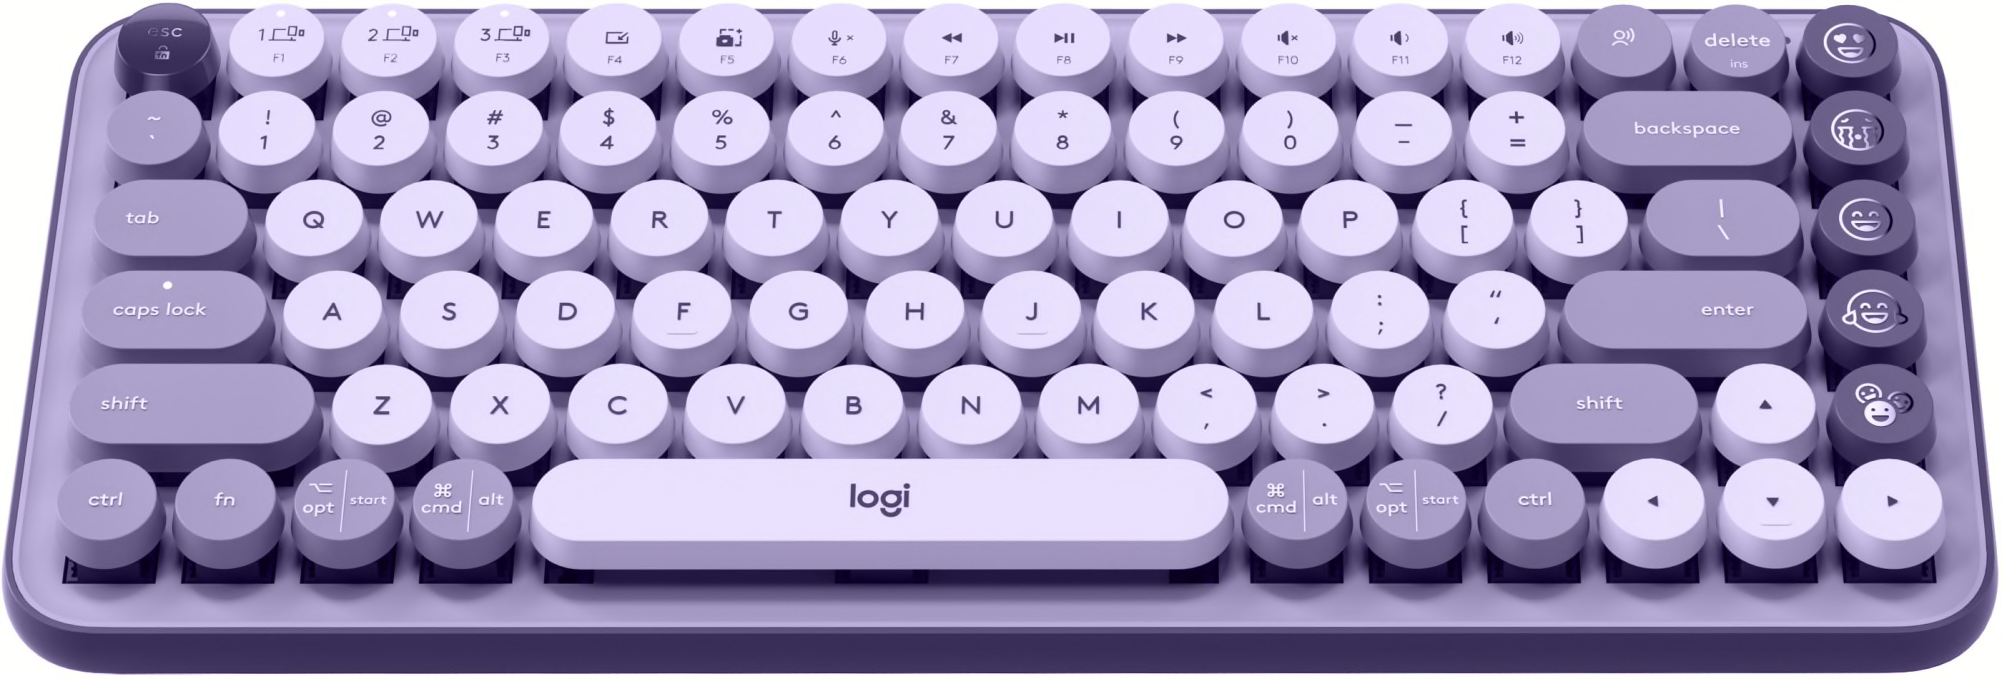 Interactive Preview Selector for Keyboard and Keycap Accessories